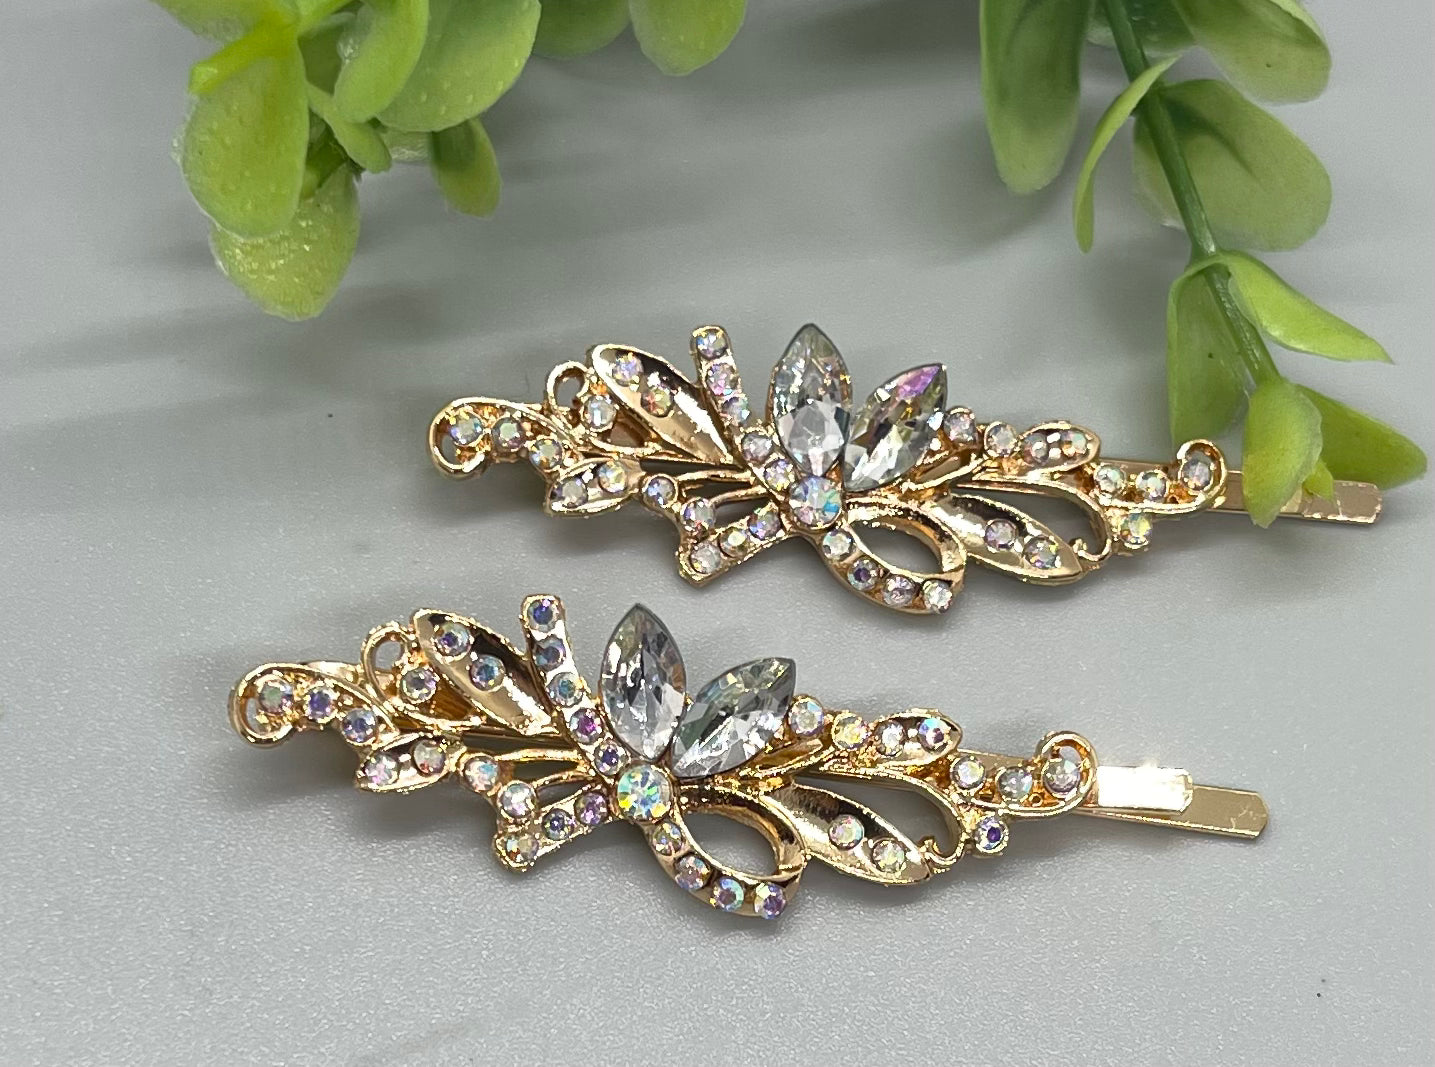 Clear crystal rhinestone Rose Gold approximately 2.75 hair pins 2 pc set wedding bridal shower engagement formal princess accessory birthday prom